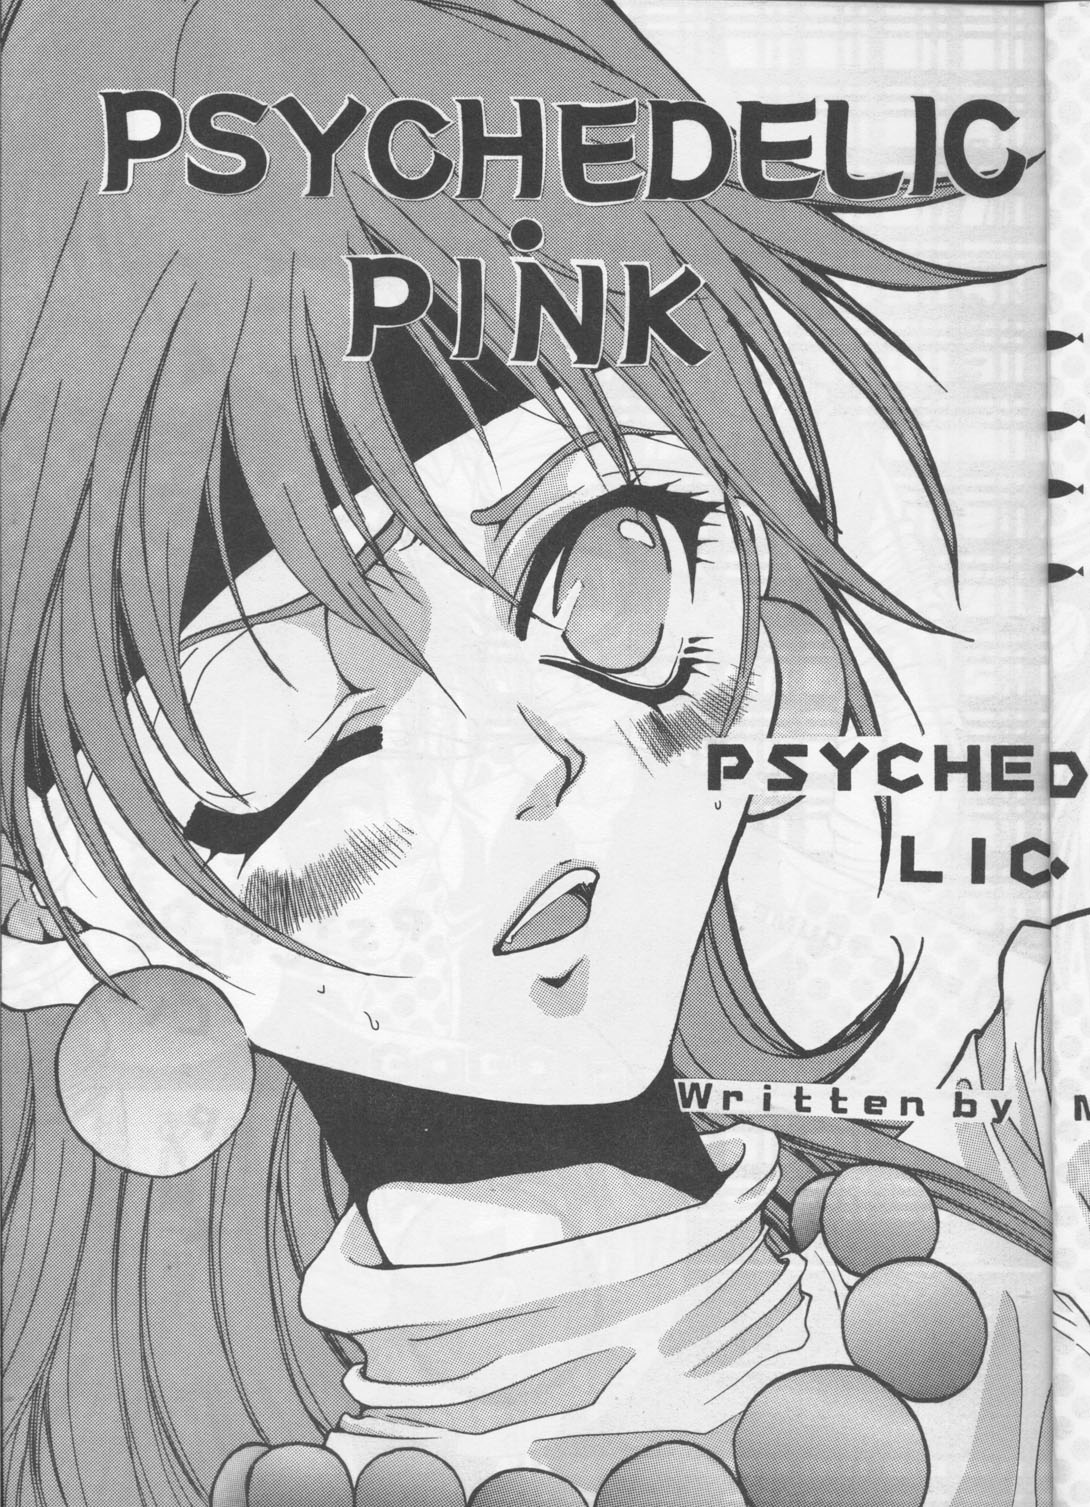 [Metal (Toumei Mieru)] PSYCHEDELIC PINK (Various) page 4 full